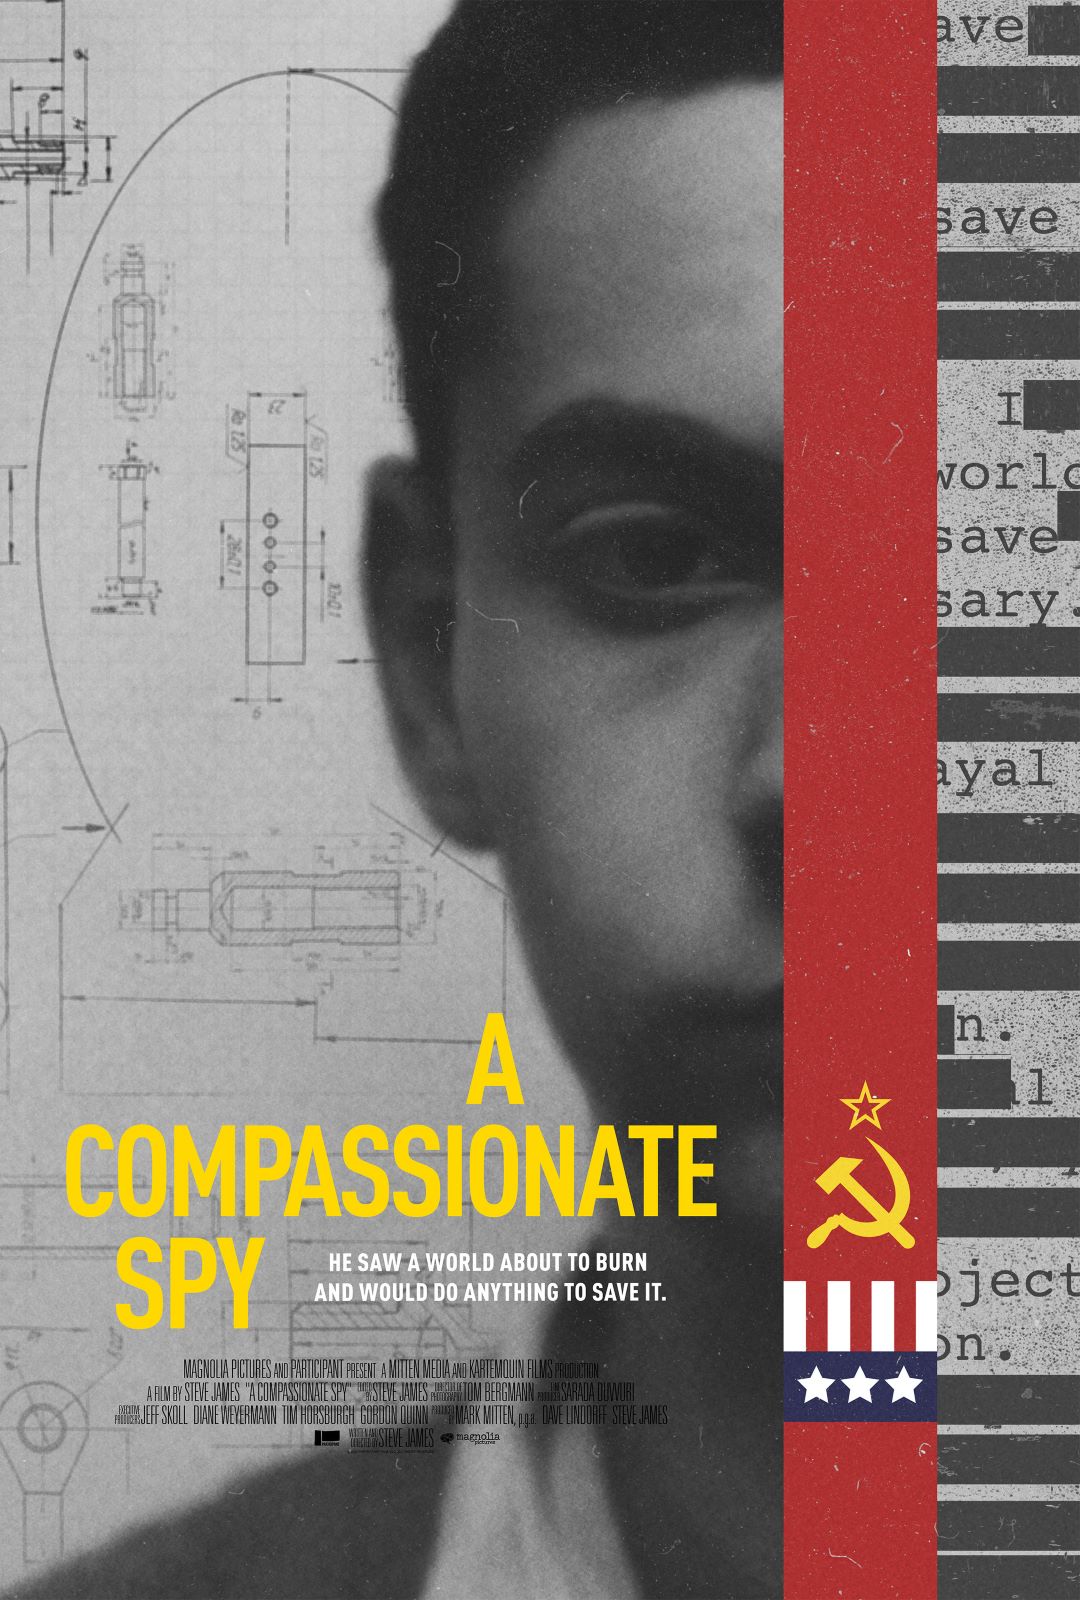 Read more about the article “A COMPASSIONATE SPY” from two-time Oscar® nominee Steve James’ is an engrossing story about the nuclear spy, his love story, and an important message to the world